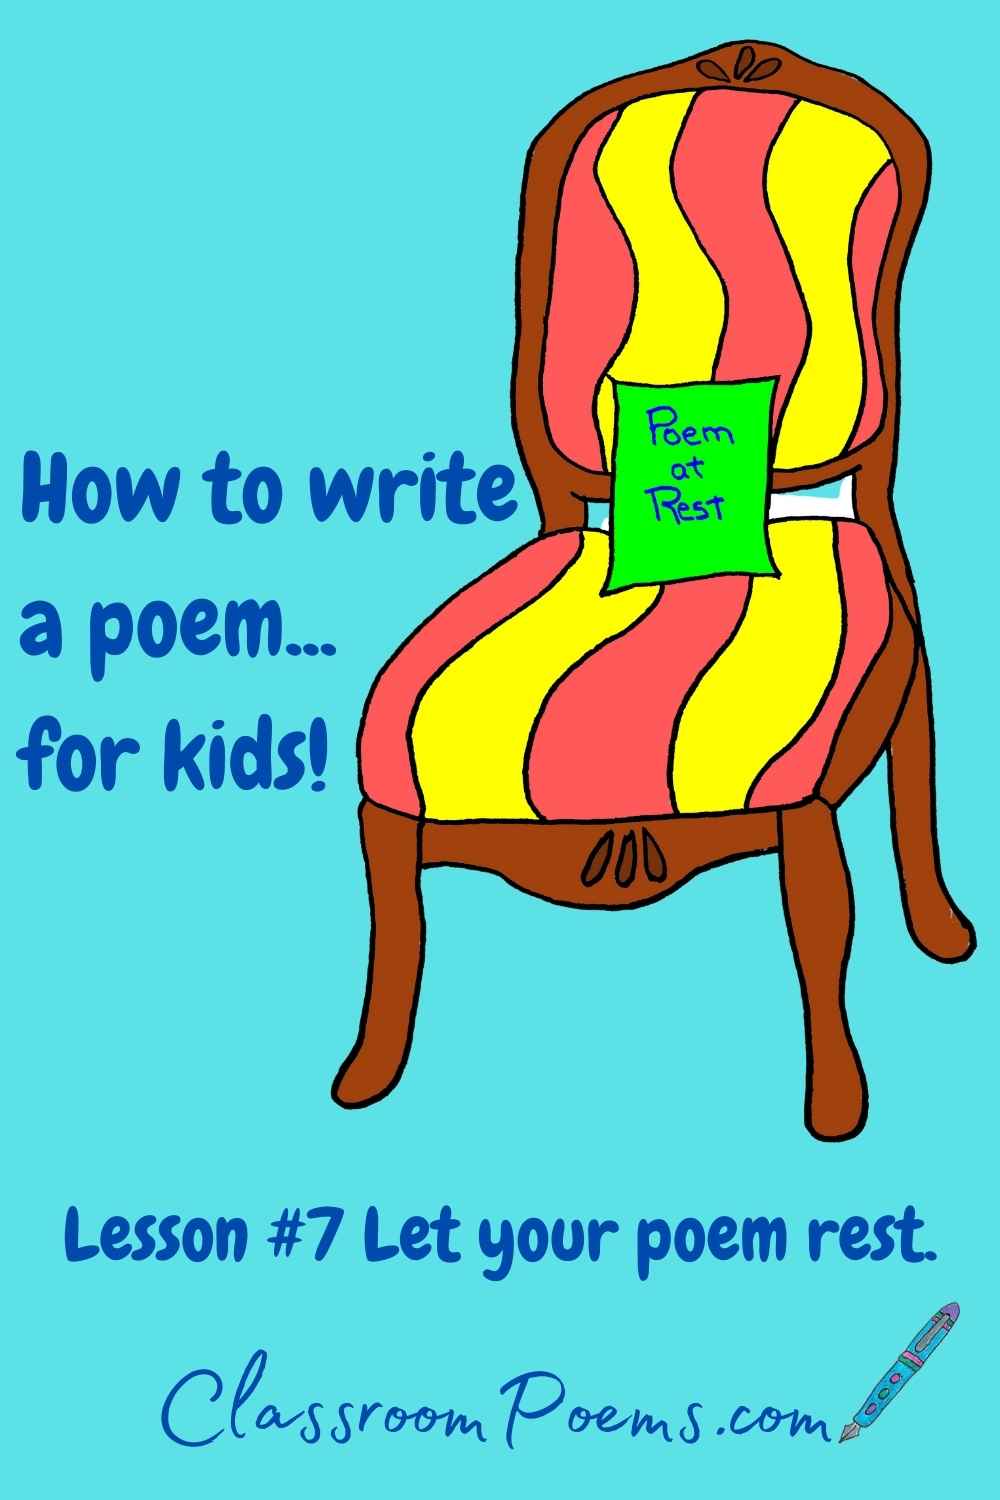 How to teach poetry to kids. Let your poem rest.